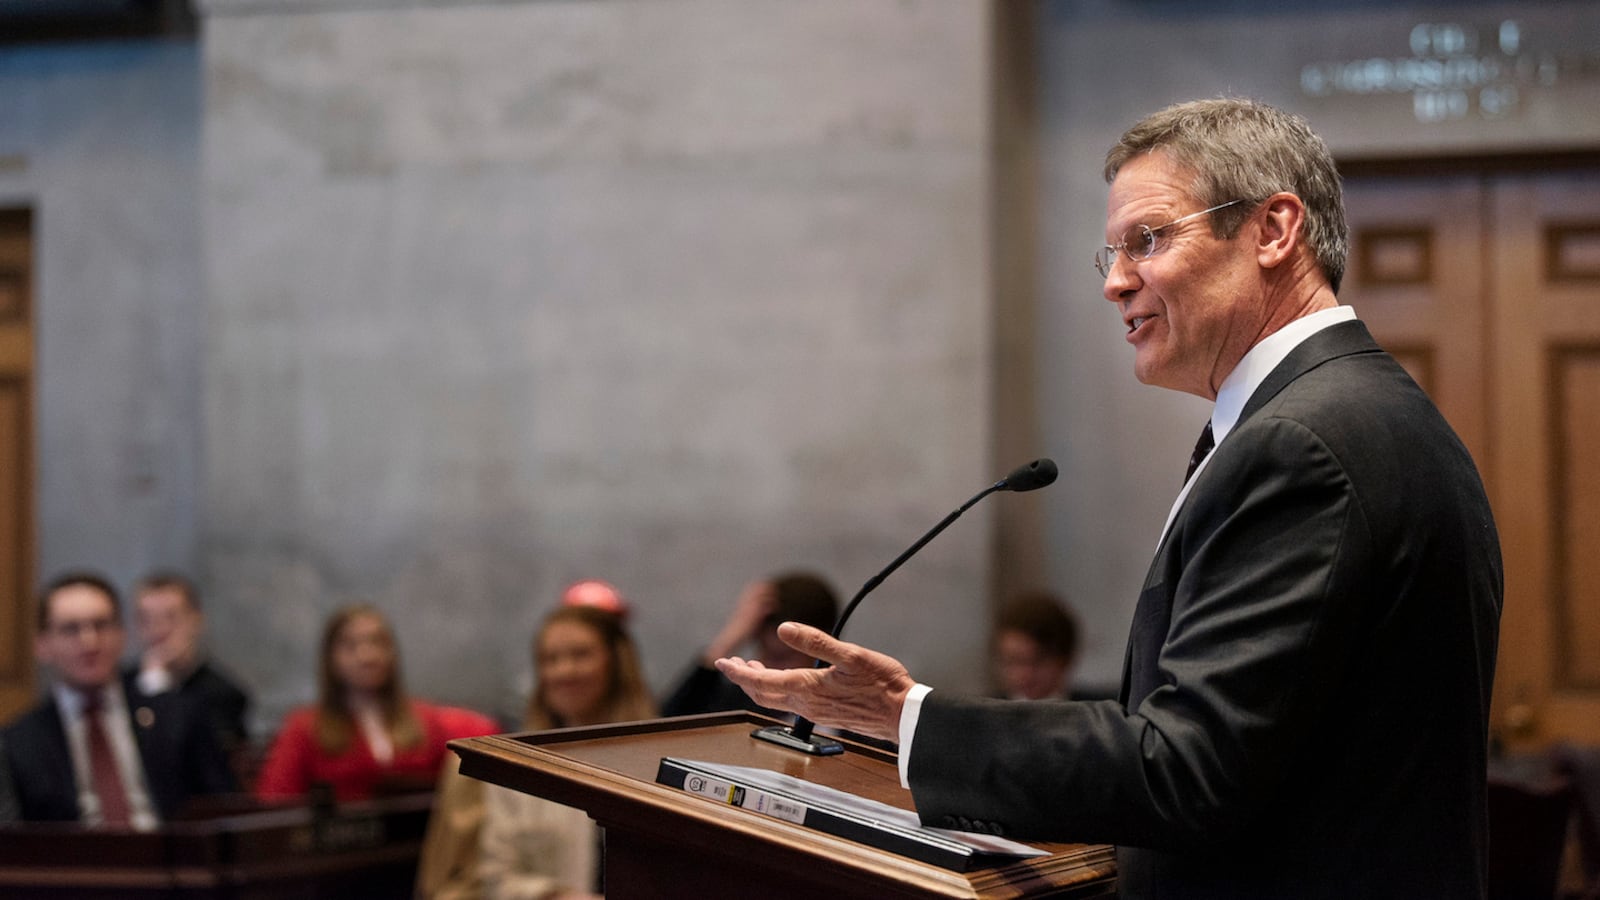 Gov. Bill Lee will release his first proposed budget and deliver his first State of the State address on Monday at the State Capitol.